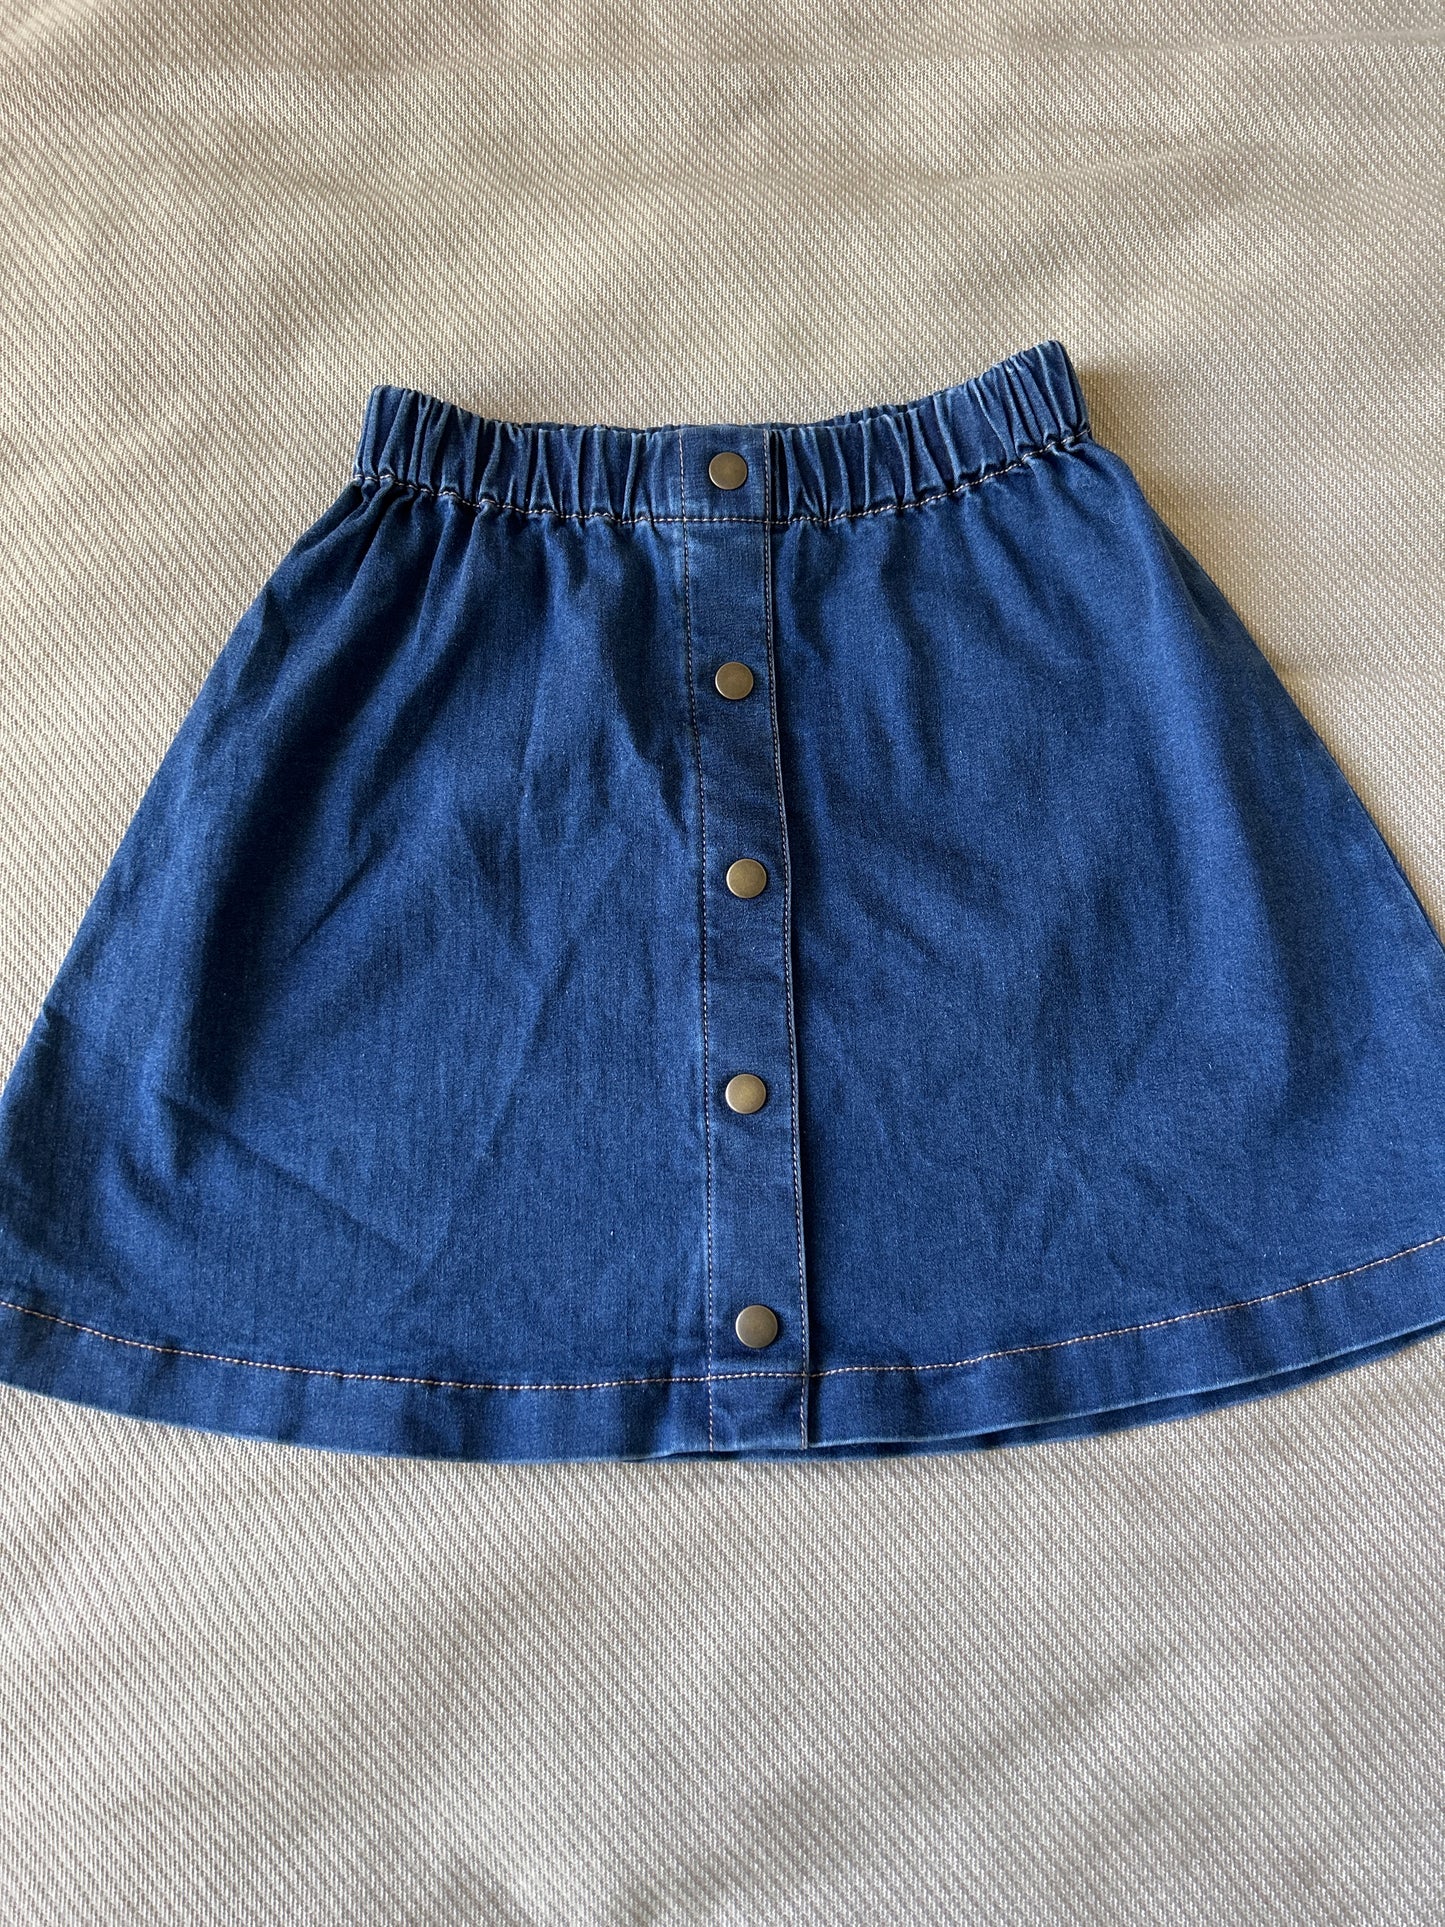 Hanna Andersson/Girl’s Jean Skirt/Size 140(10)